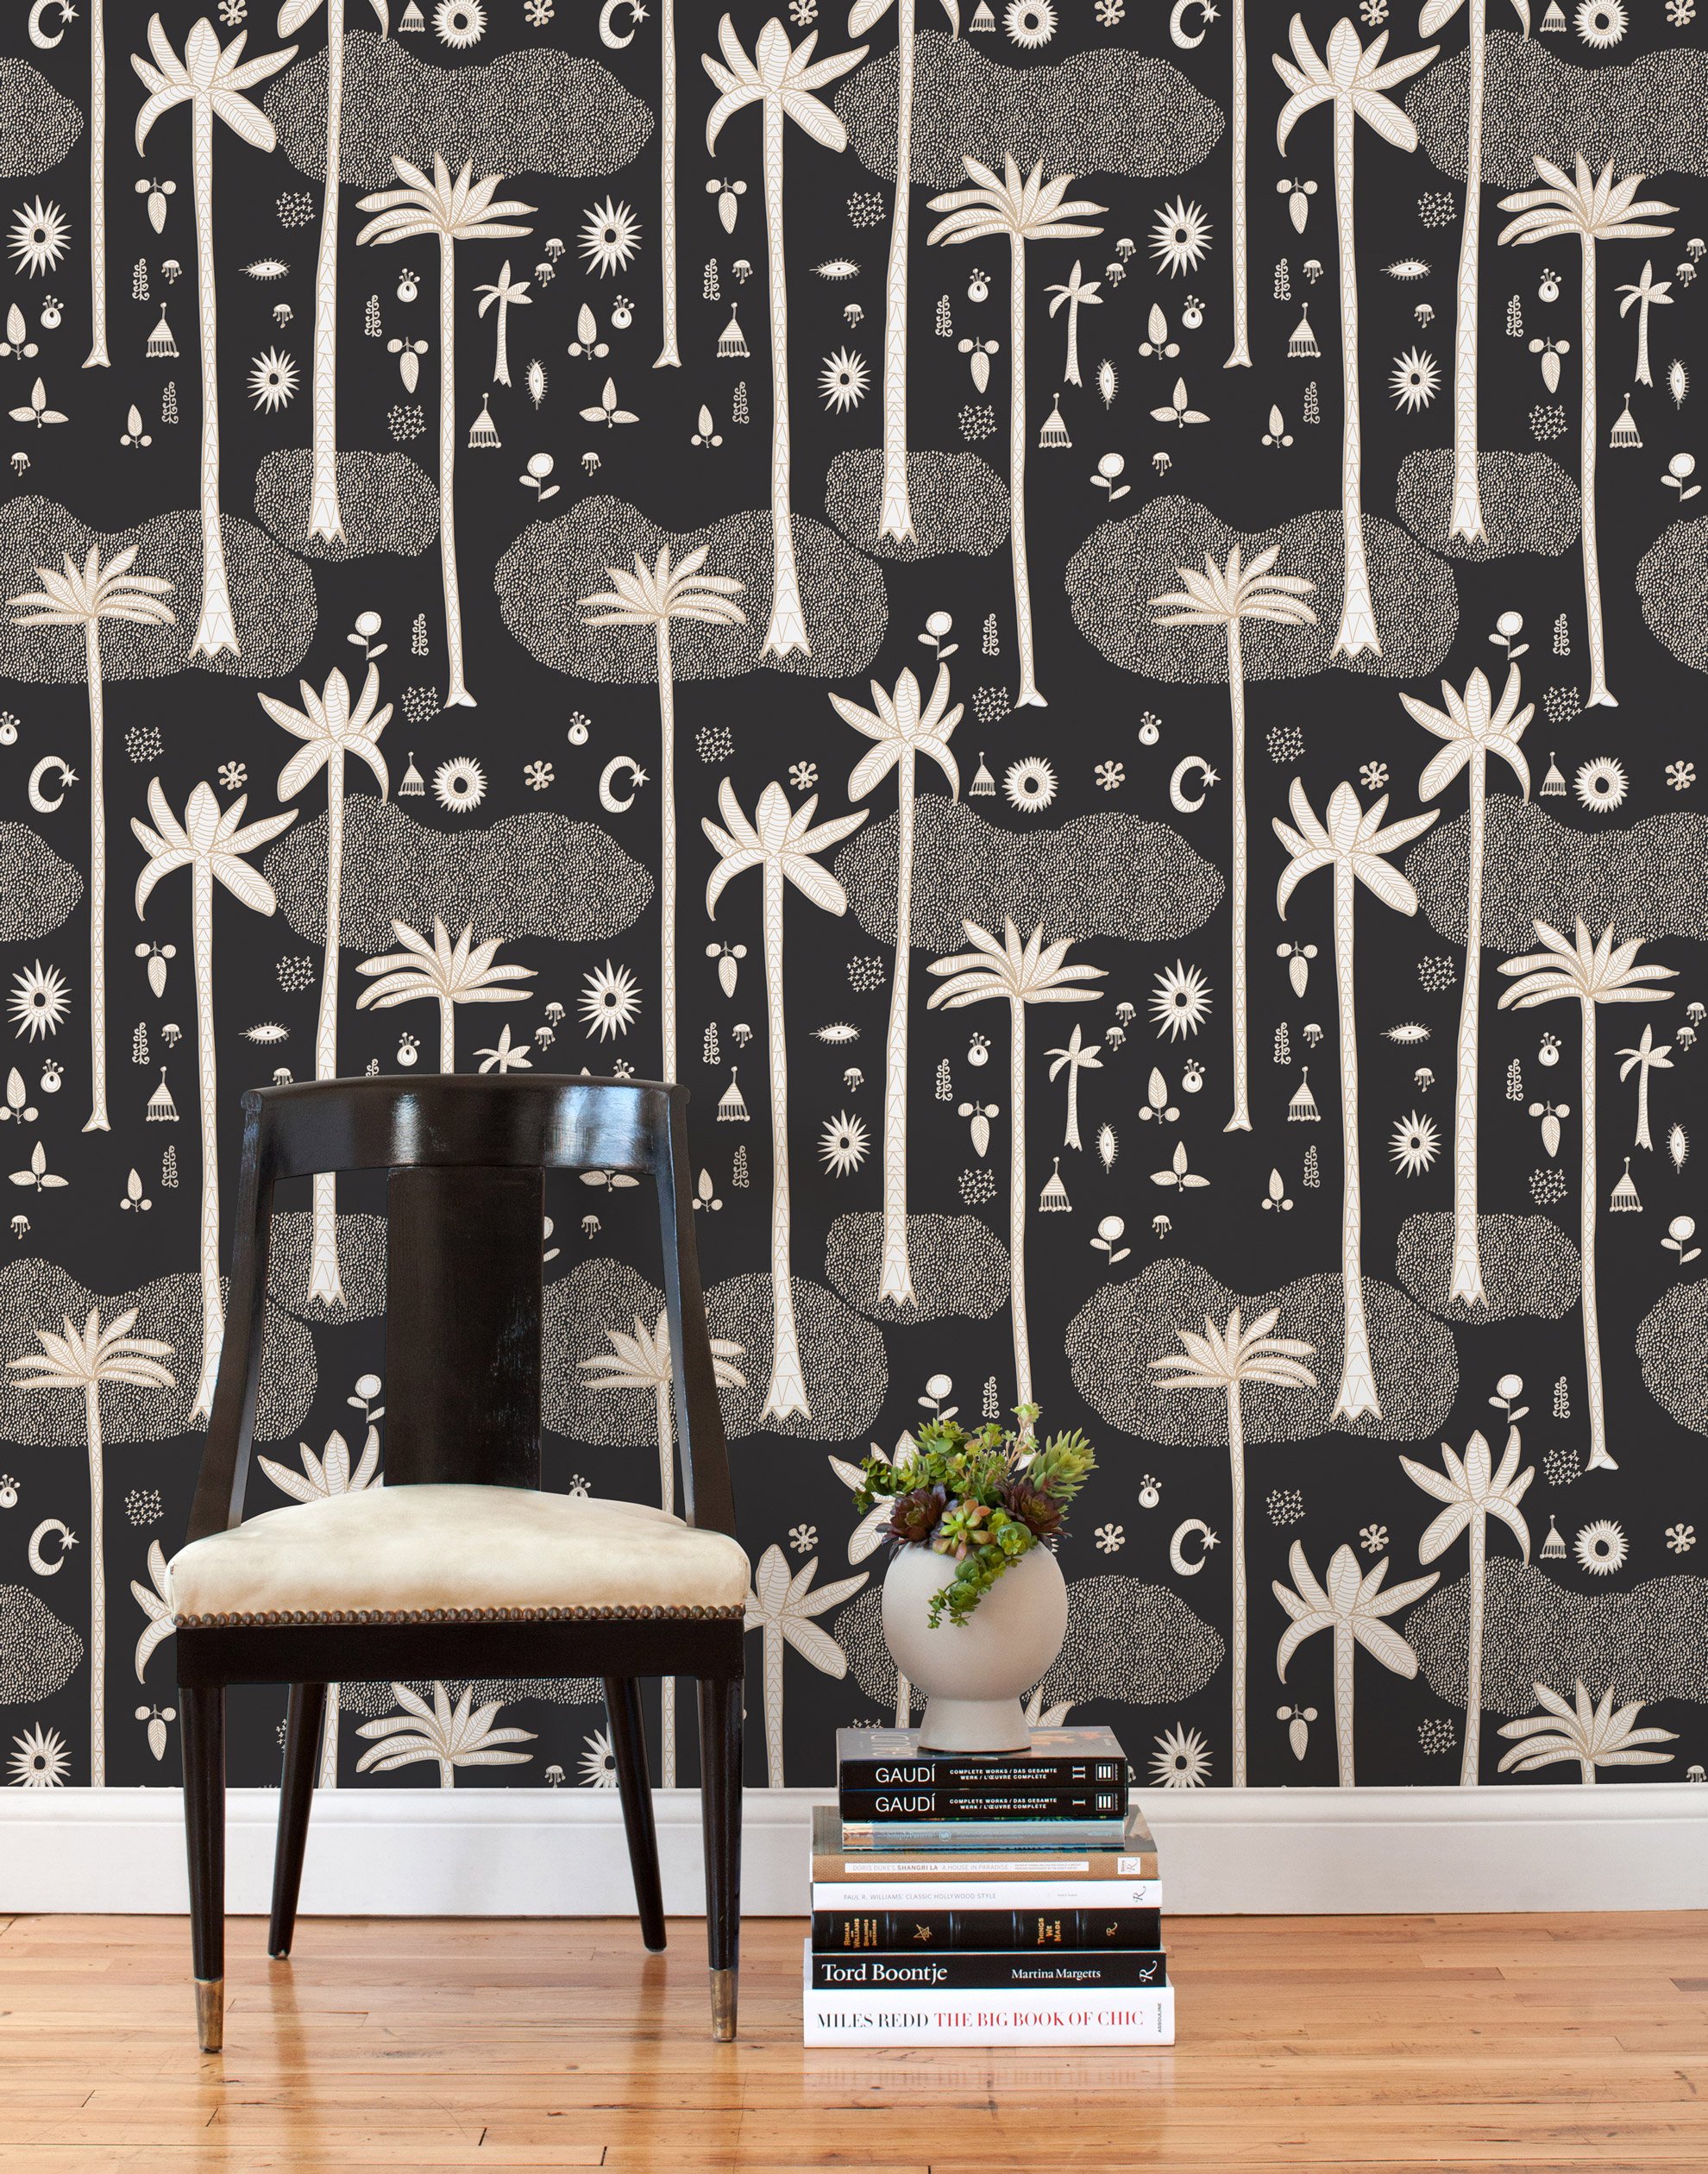 black and white removable wallpaper,wallpaper,room,black and white,wall,interior design